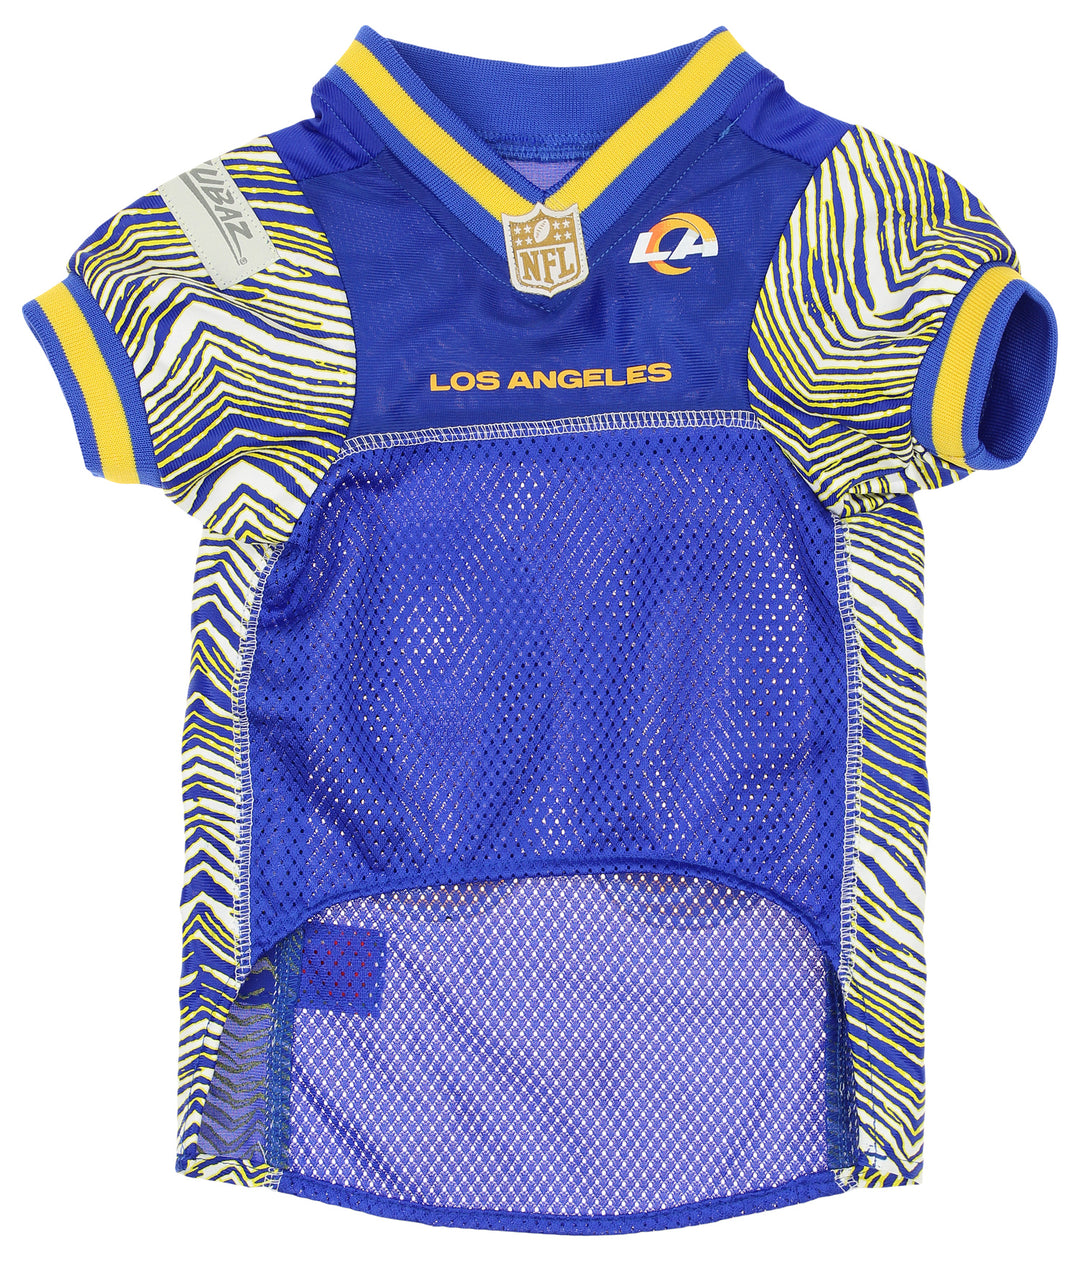 Zubaz X Pets First NFL Los Angeles Rams Jersey For Dogs & Cats